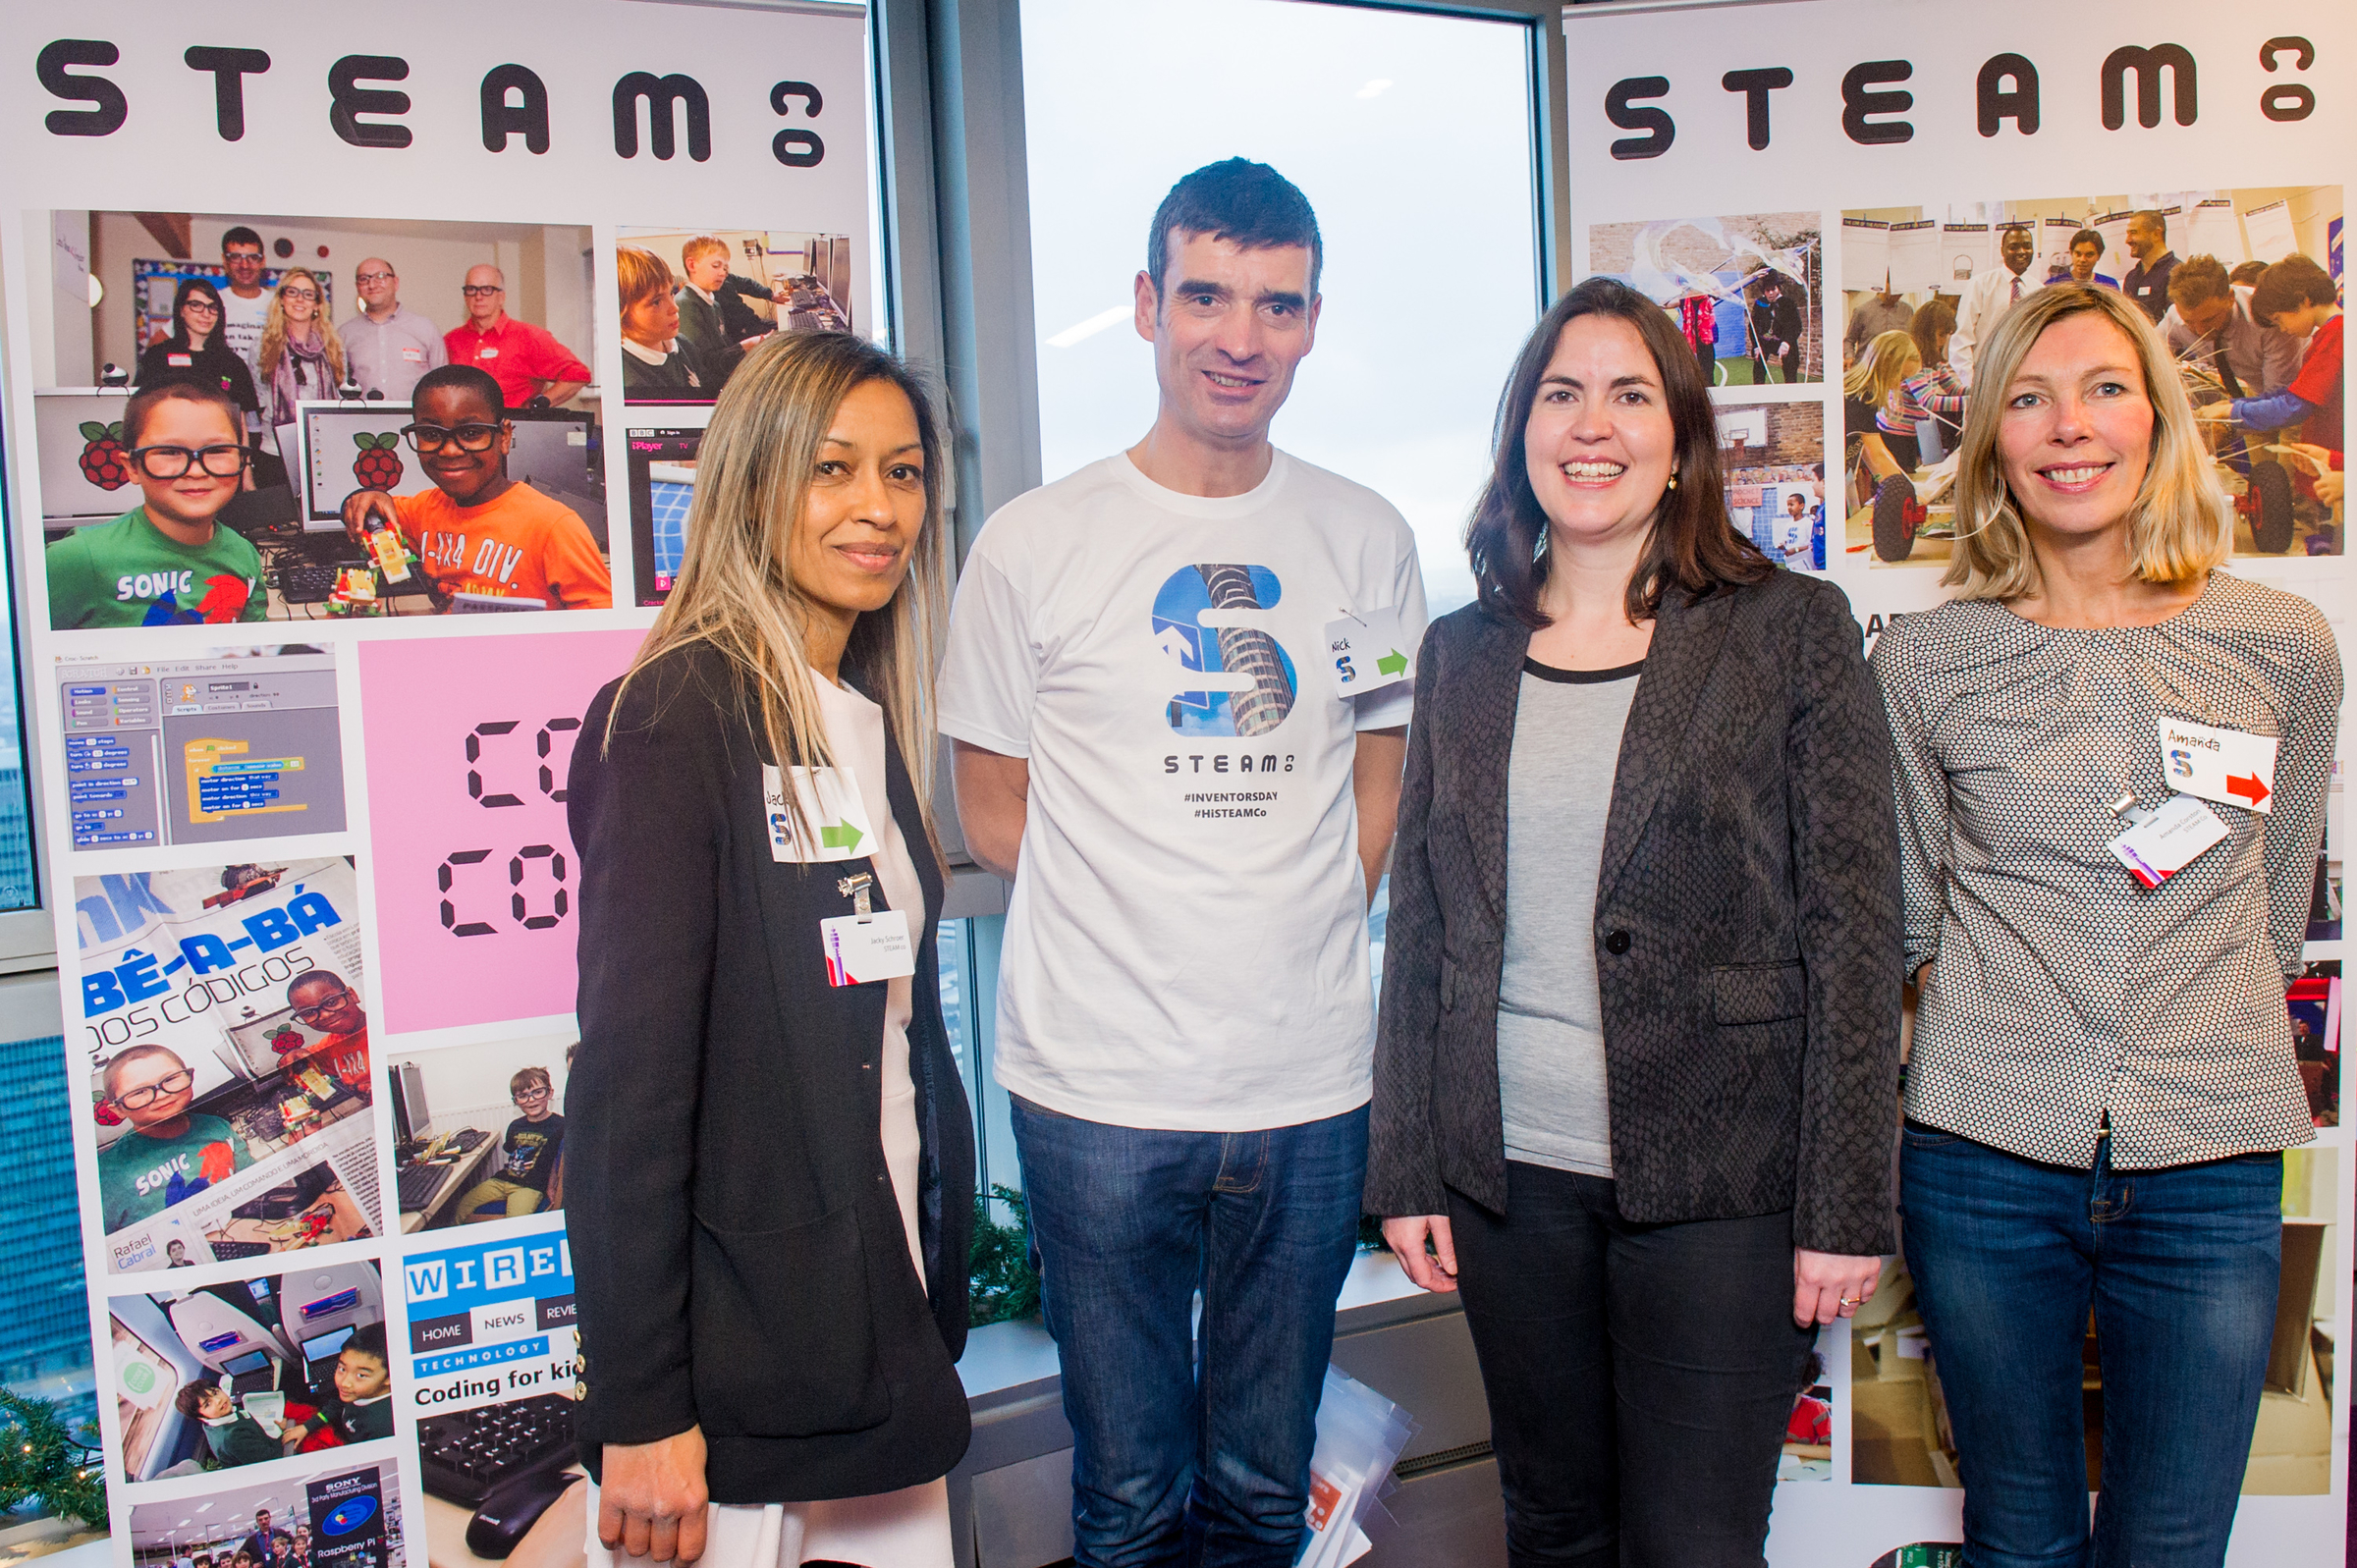 Suzy Christopher of BT with the STEAM Co. founders Jacky Schroer and Nick and Amanda Corston